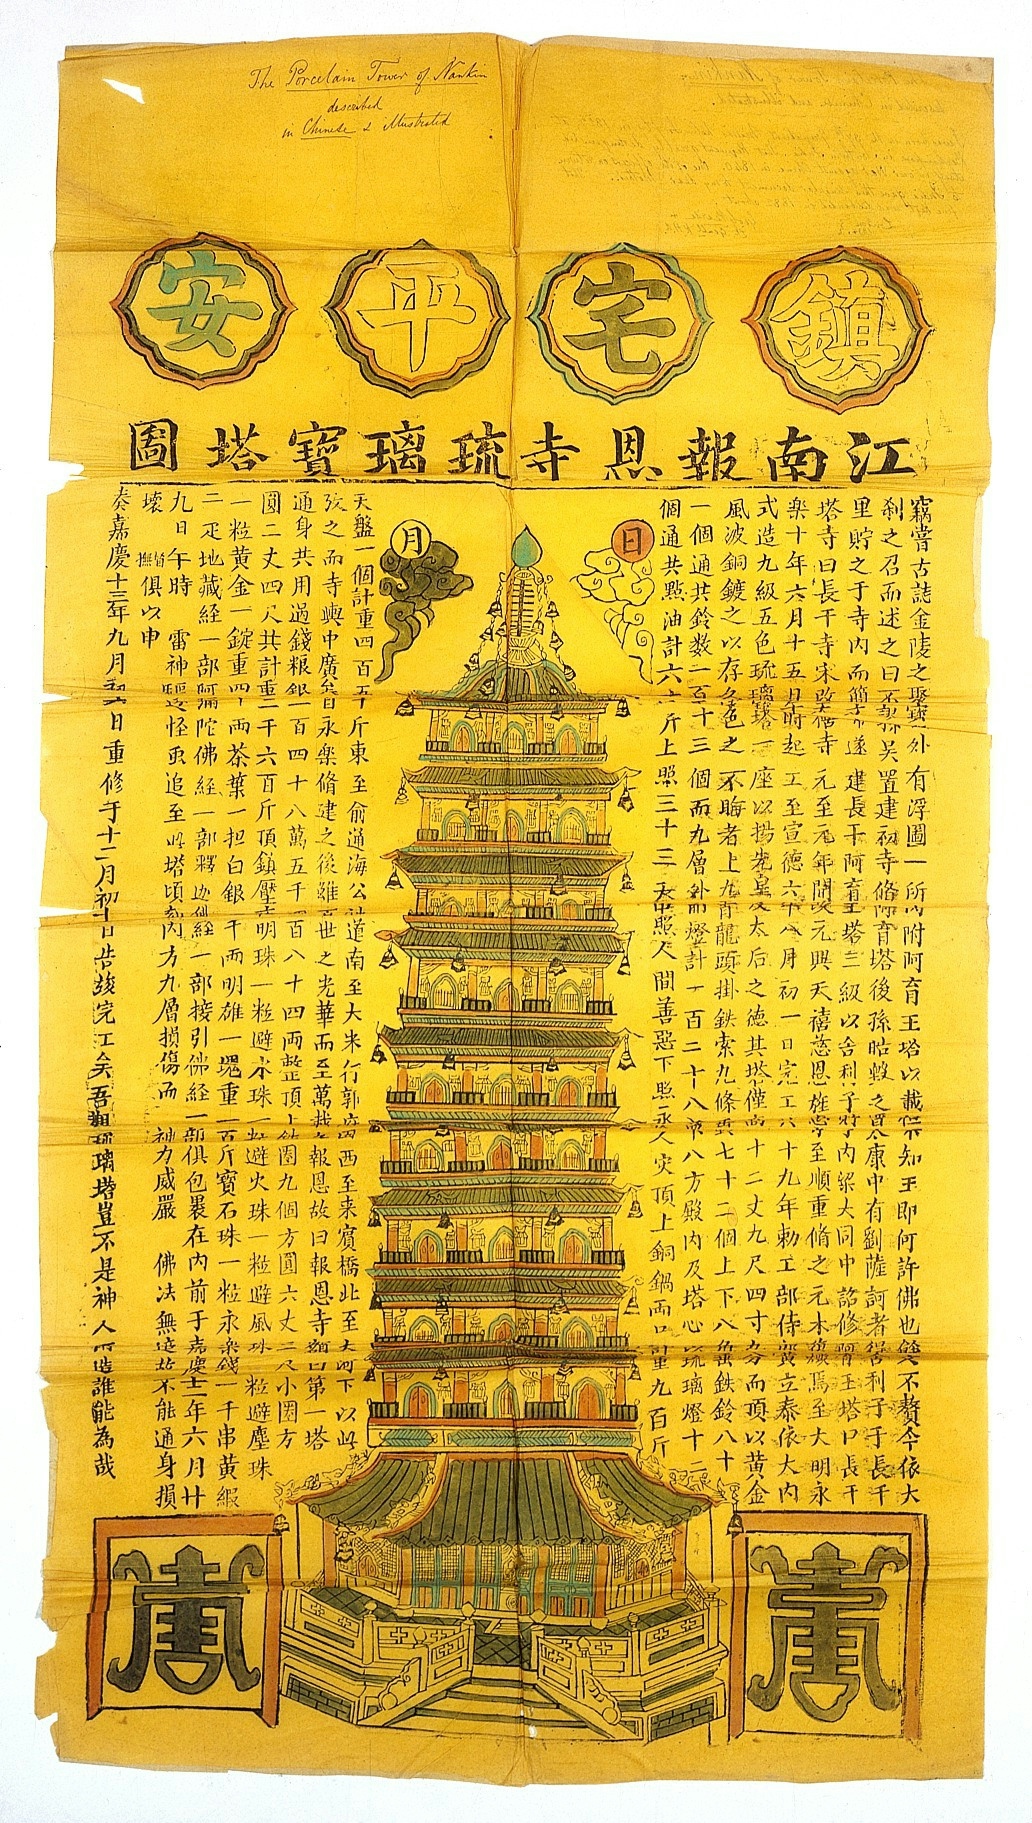 Pictorial map of the porcelain pagoda (or stupa) of the Pao-en-szu of Nanking, surrounded by written characters.